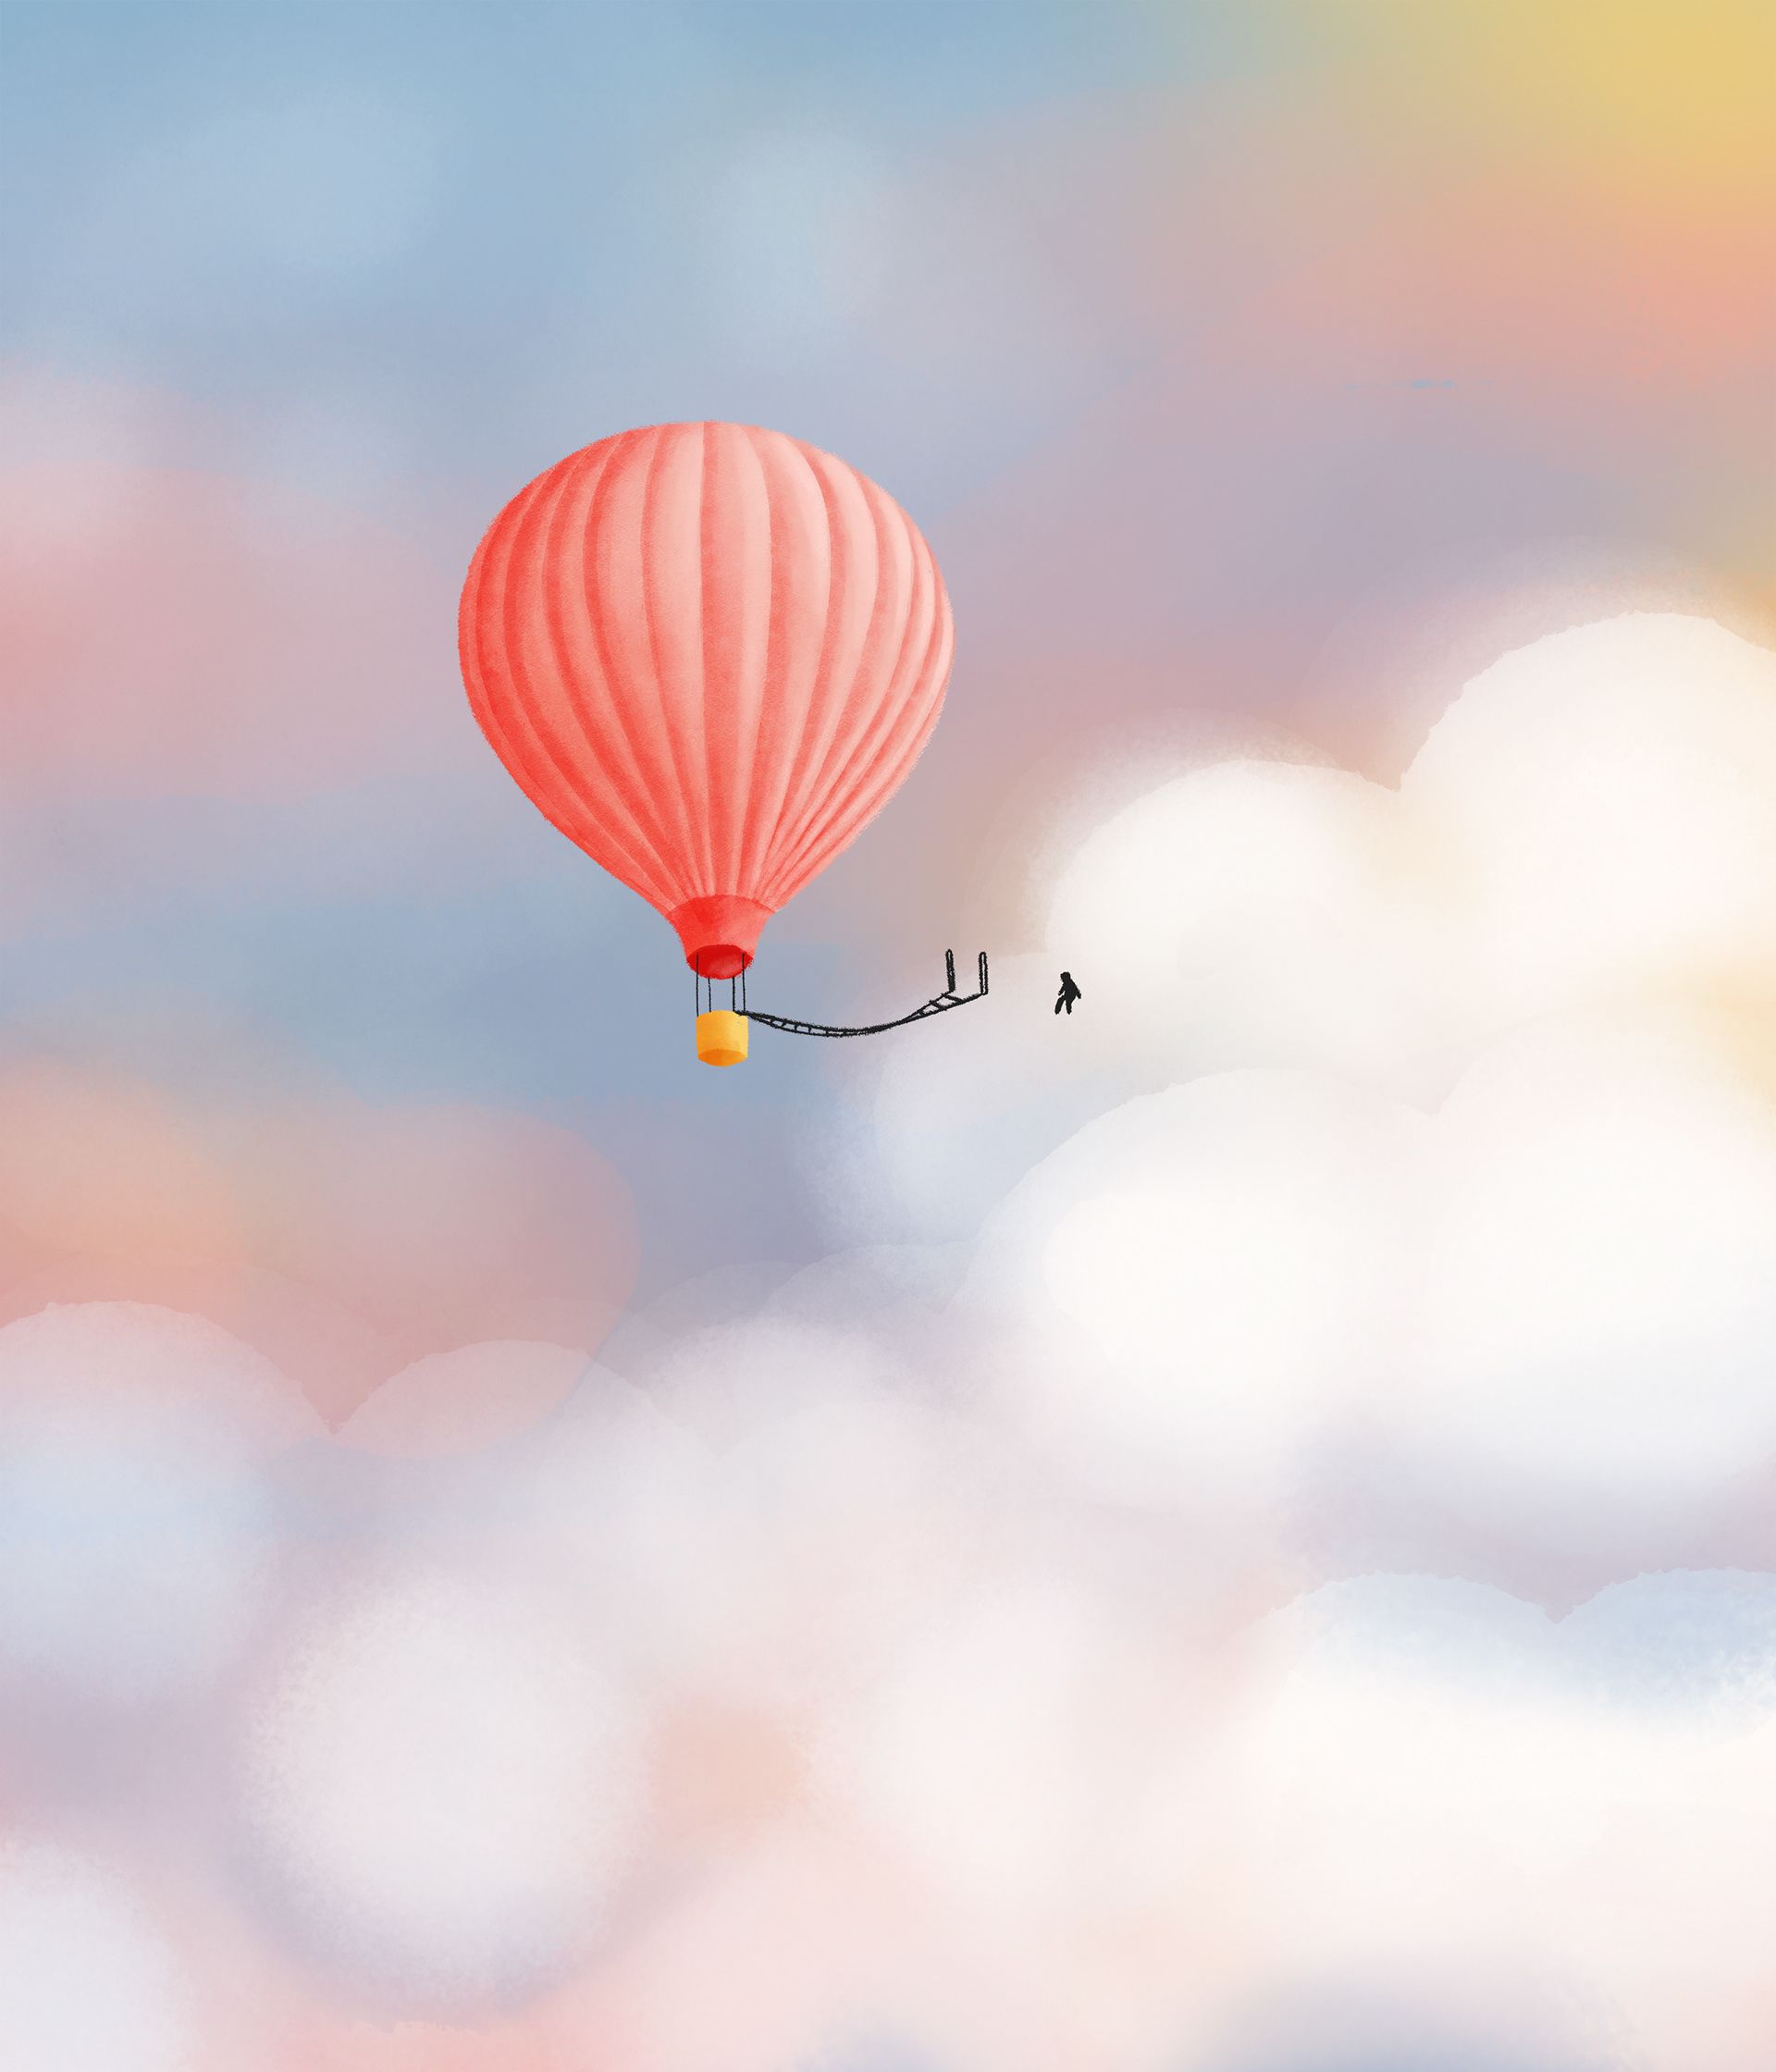 A red hot air balloon floating above the clouds with two people standing on a ladder attached to the side. The sky is blue with a few clouds and the sun is setting in the background casting a warm glow over the scene. - Hot air balloons